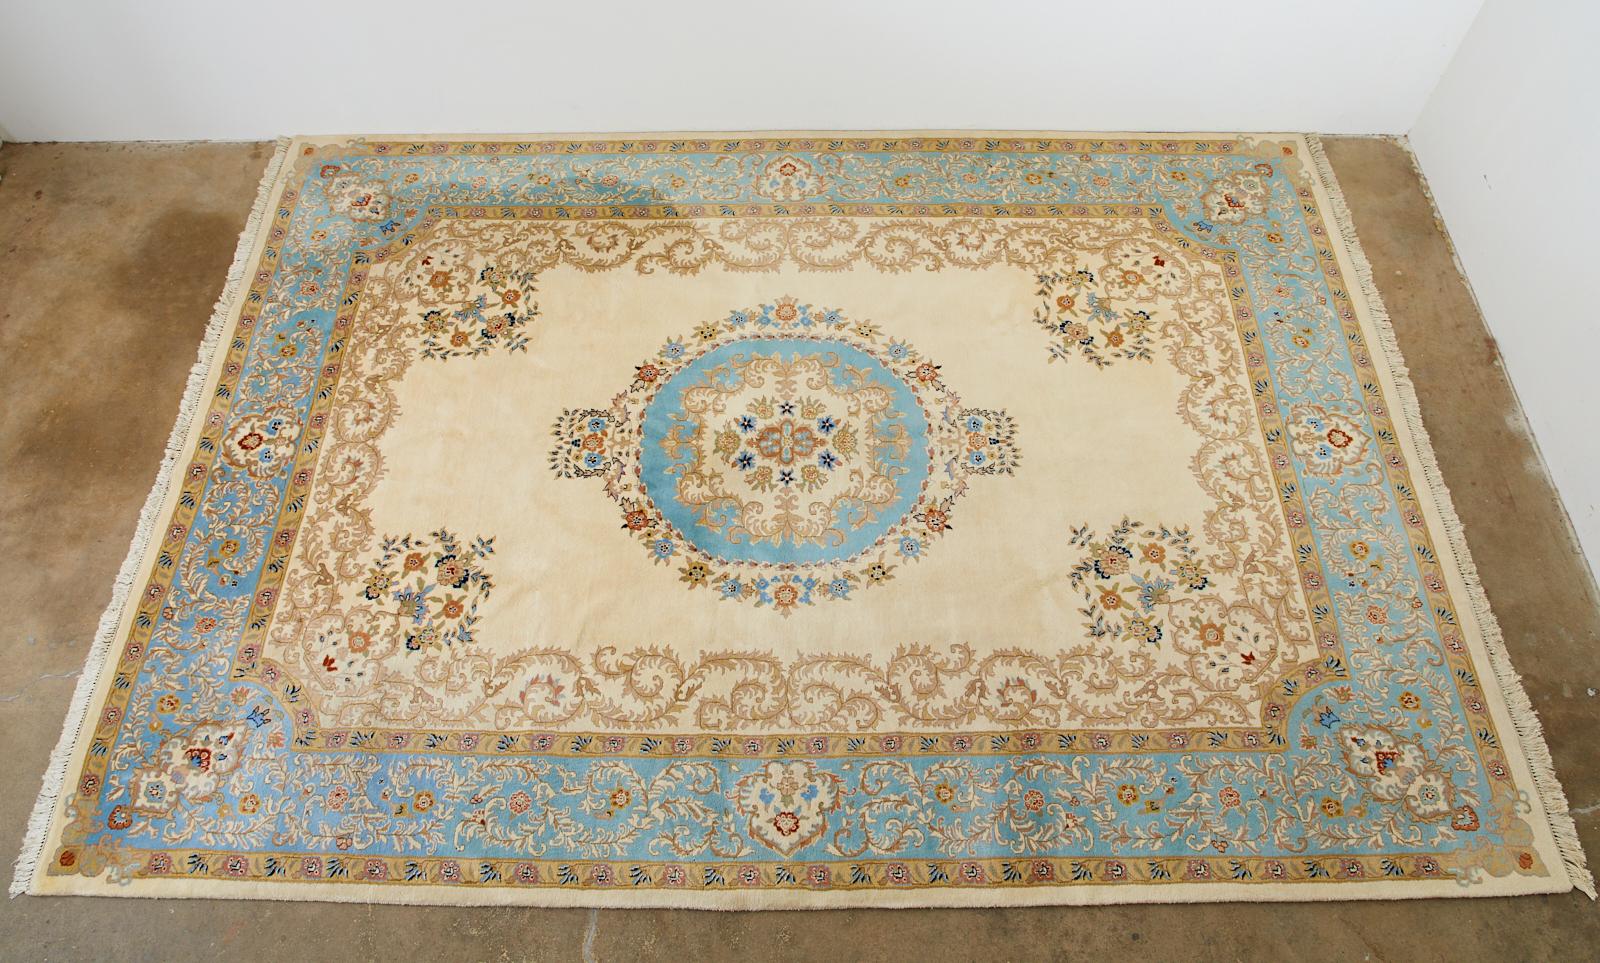 Exquisite Indo Kerman rug featuring a rare turquoise blue over a cream background. Hand-knotted with a soft wool pile and a cotton foundation. Elegant rug made with a deep full high pile.
   